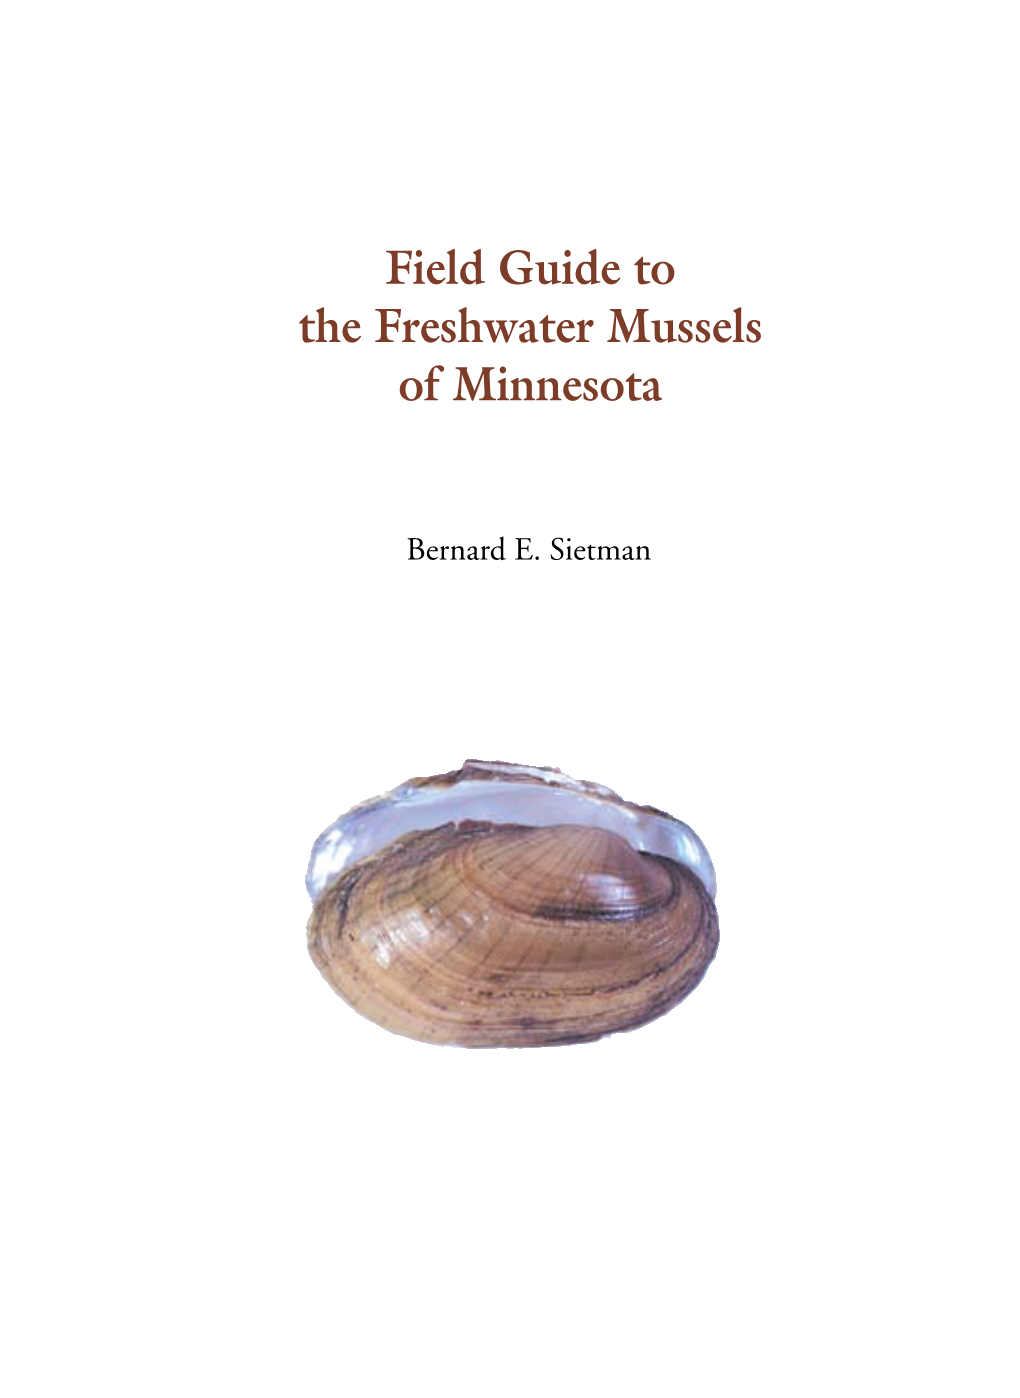 Field Guide to the Freshwater Mussels of Minnesota